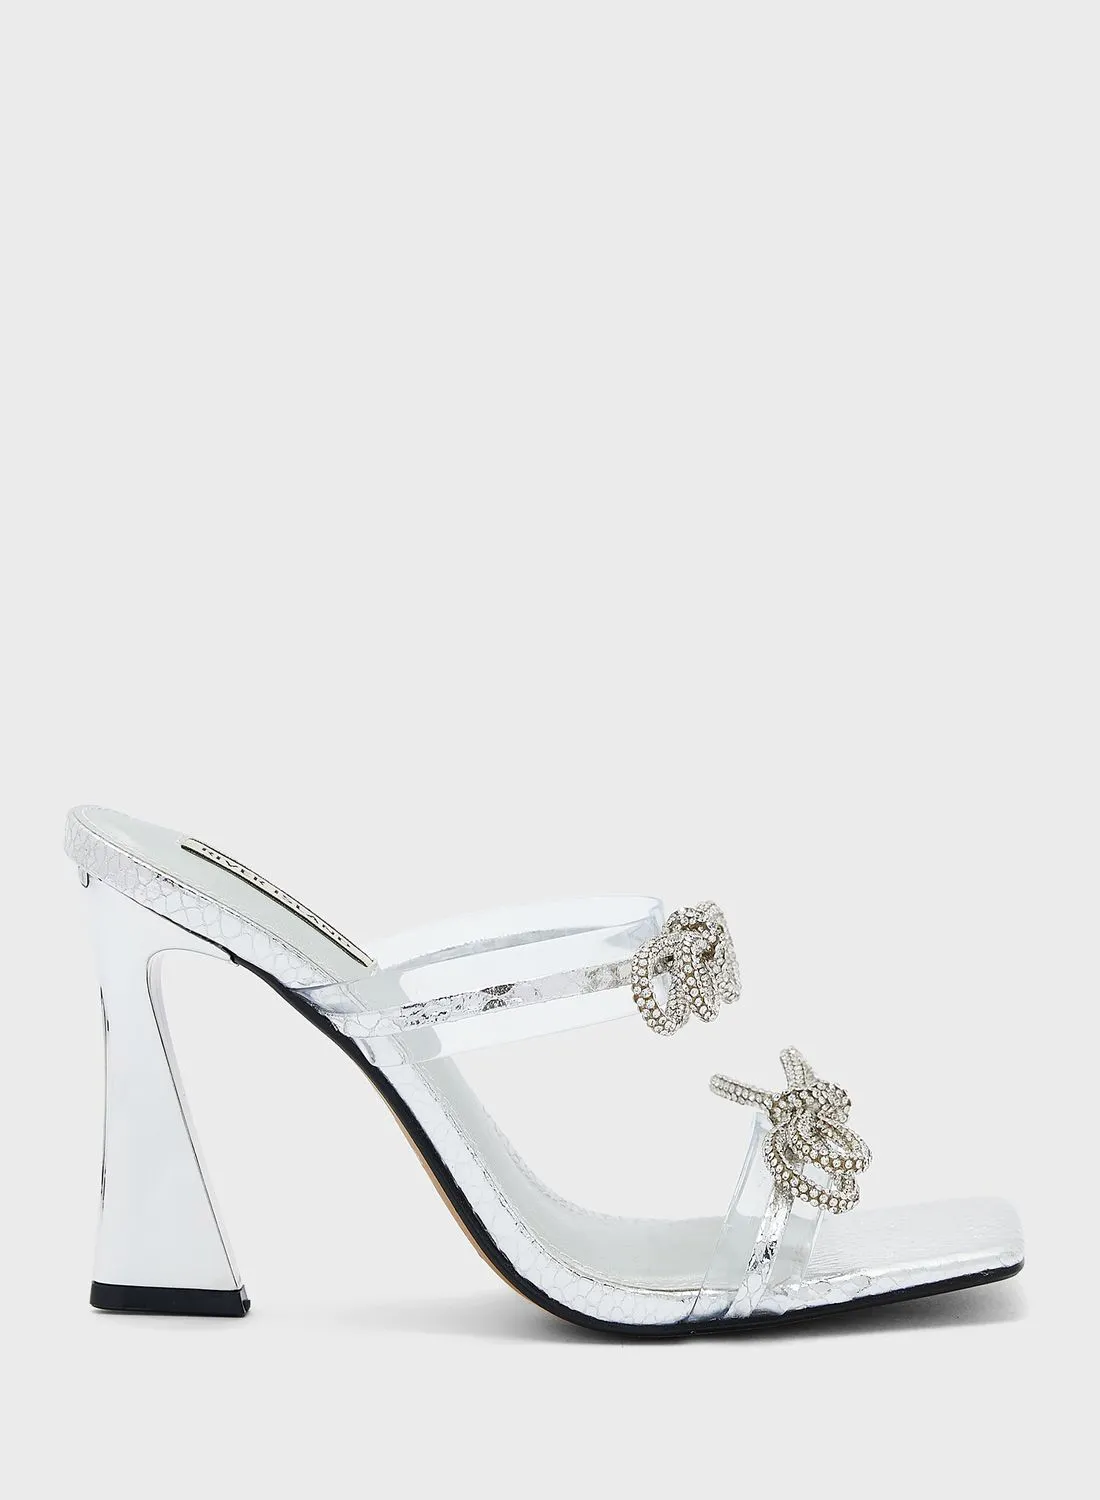 RIVER ISLAND Double Strap Bow Perspex Mule Sandals